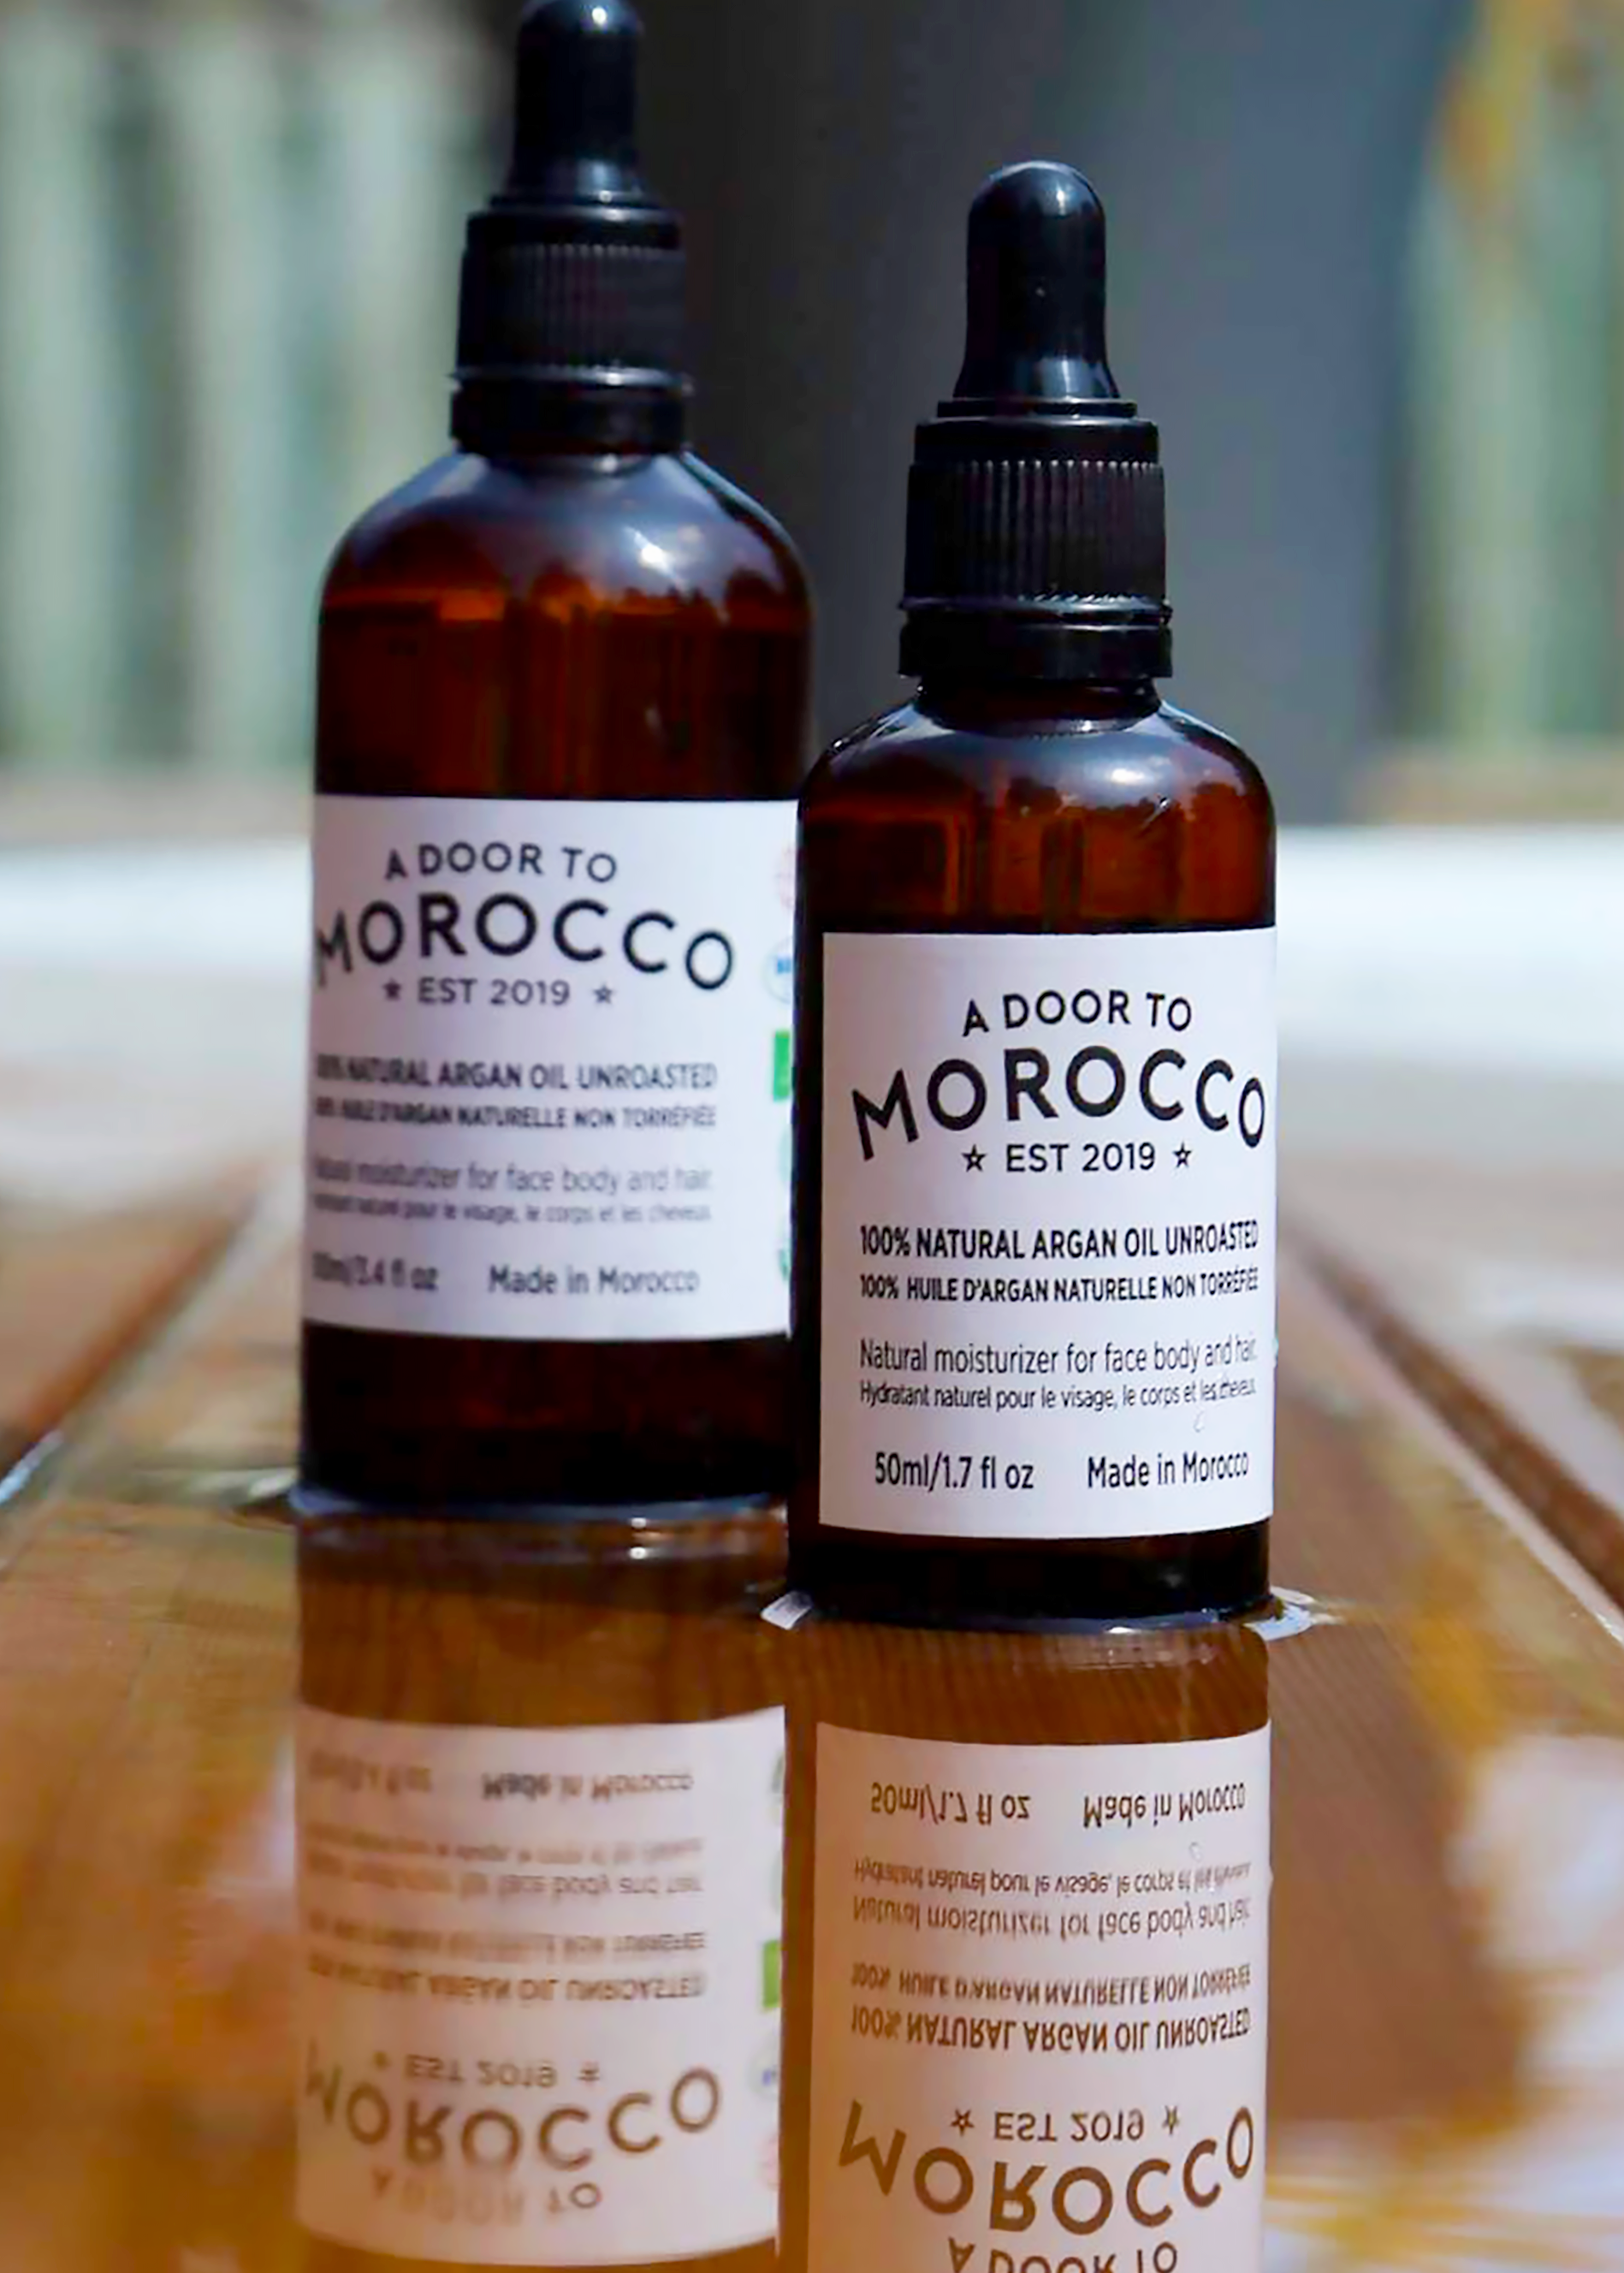 A Door to Morocco’s 50ml and 100ml bottles of argan oil with label sitting on wood with water displaying the reflection of bottles